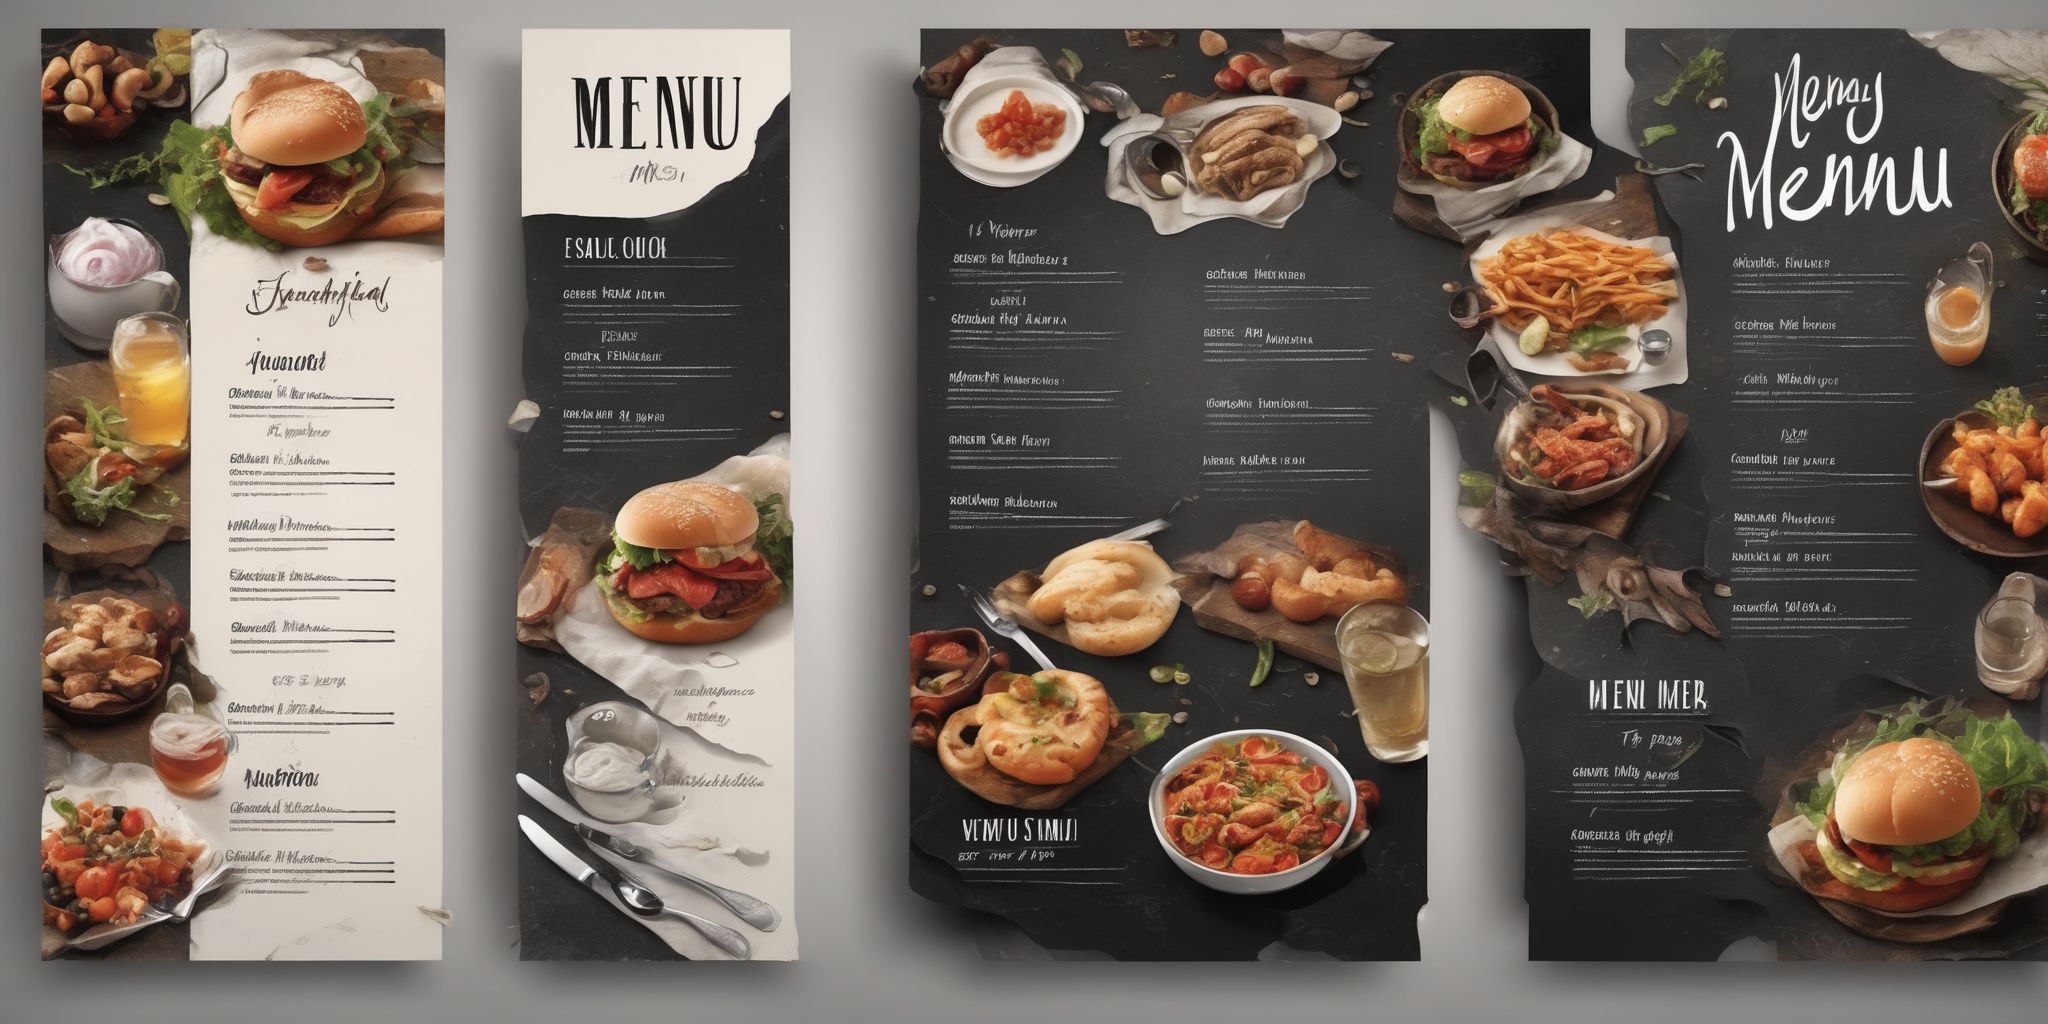 Menu  in realistic, photographic style